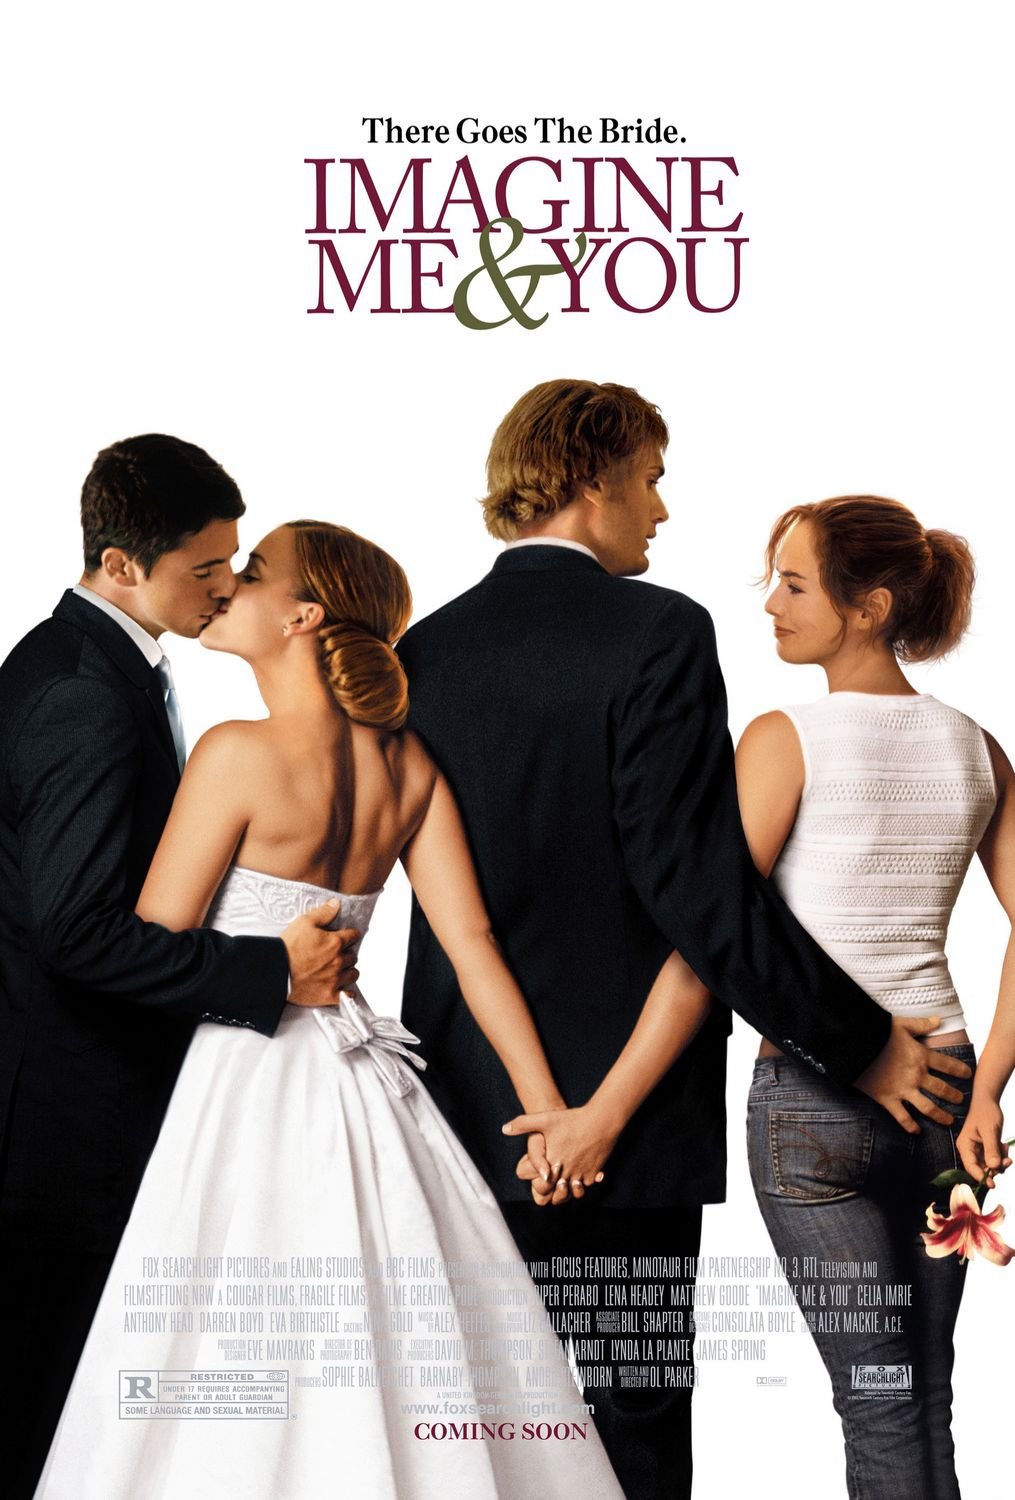 Poster of the movie Imagine Me & You